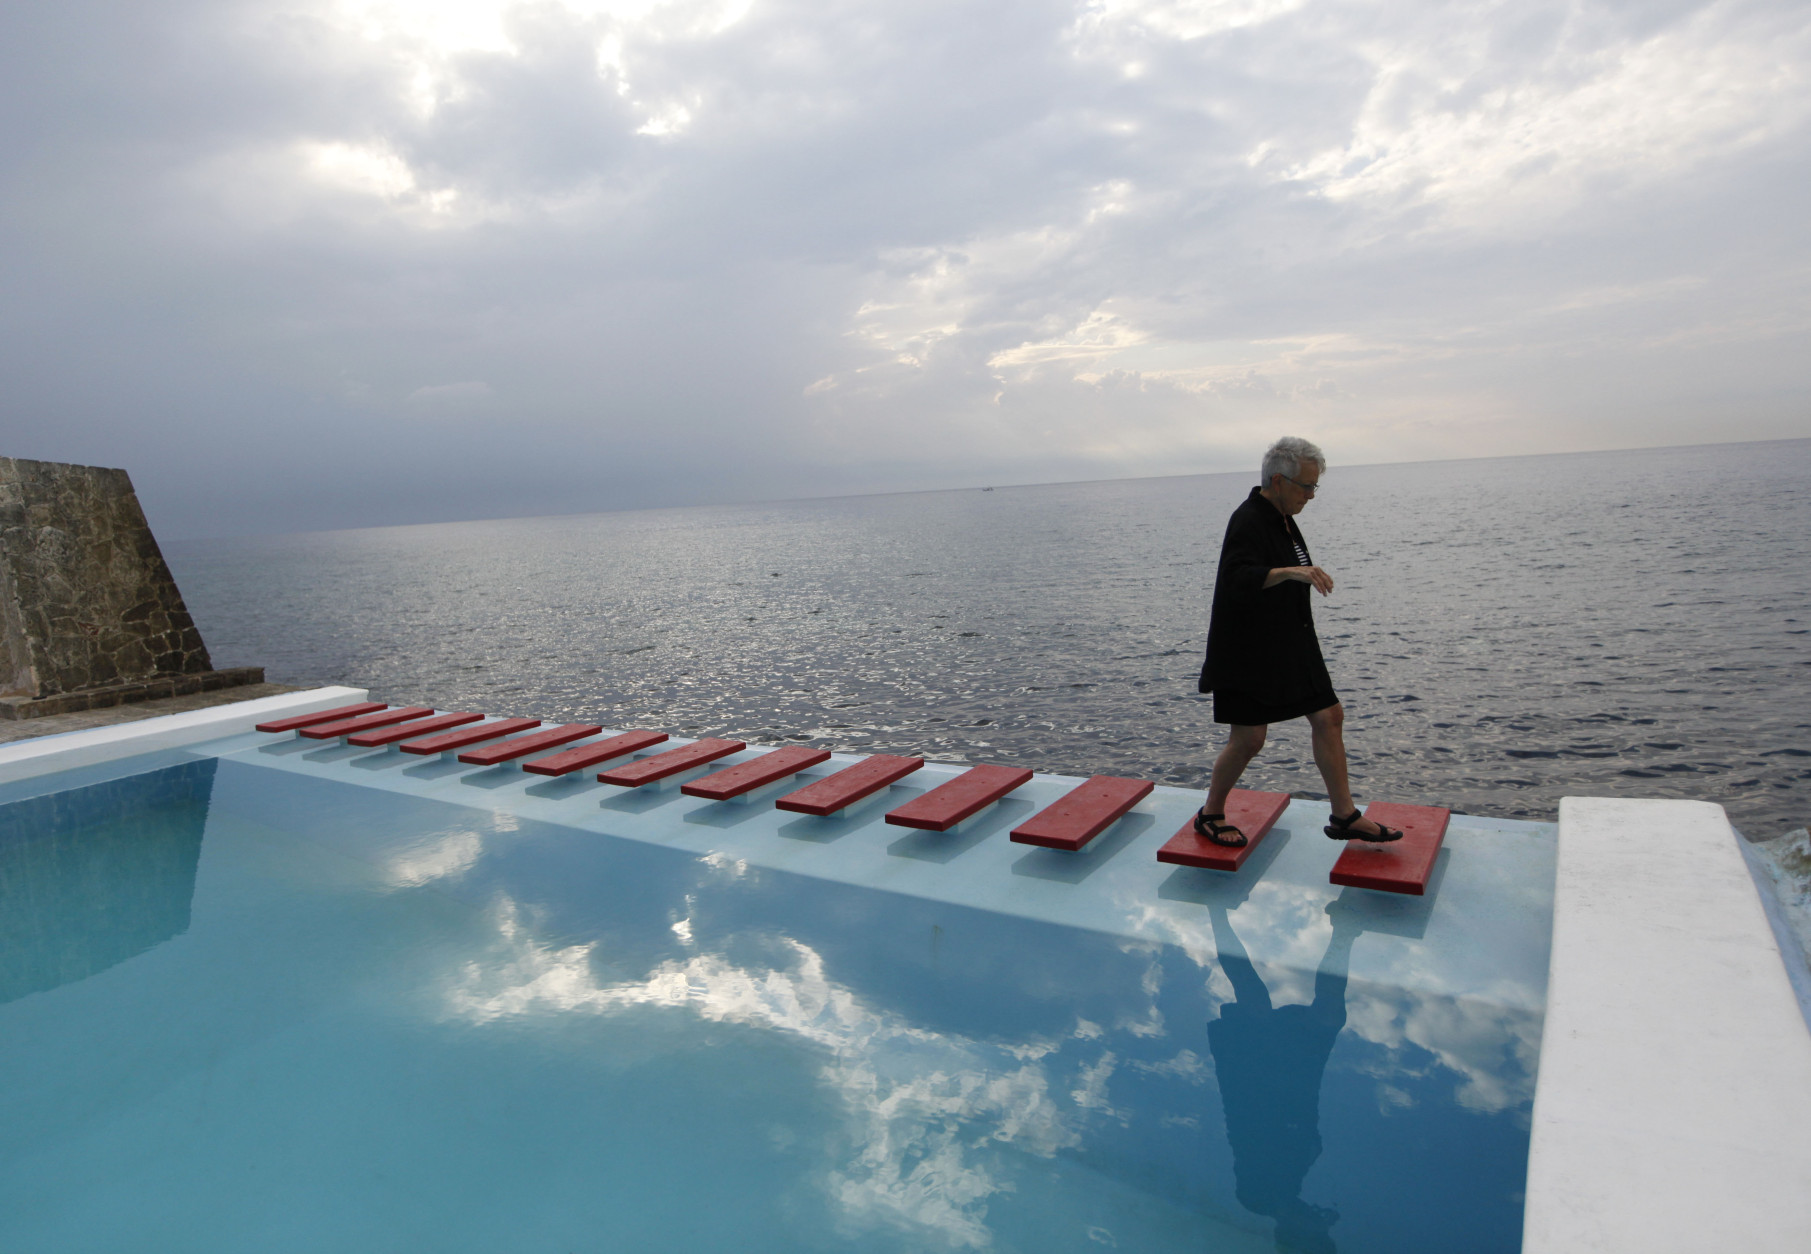 An American tourist walks across the steps of a pool with a view of Havana Bay at Paladar Vistamar in the upscale Miramar section of Havana, Cuba, Thursday, April 19, 2012.  Palardares are privately-run restaurants, usually in private homes, where tourists can dine on higher quality food than the fare generally available in government-run restaurants.(AP Photo/Kathy Willens)